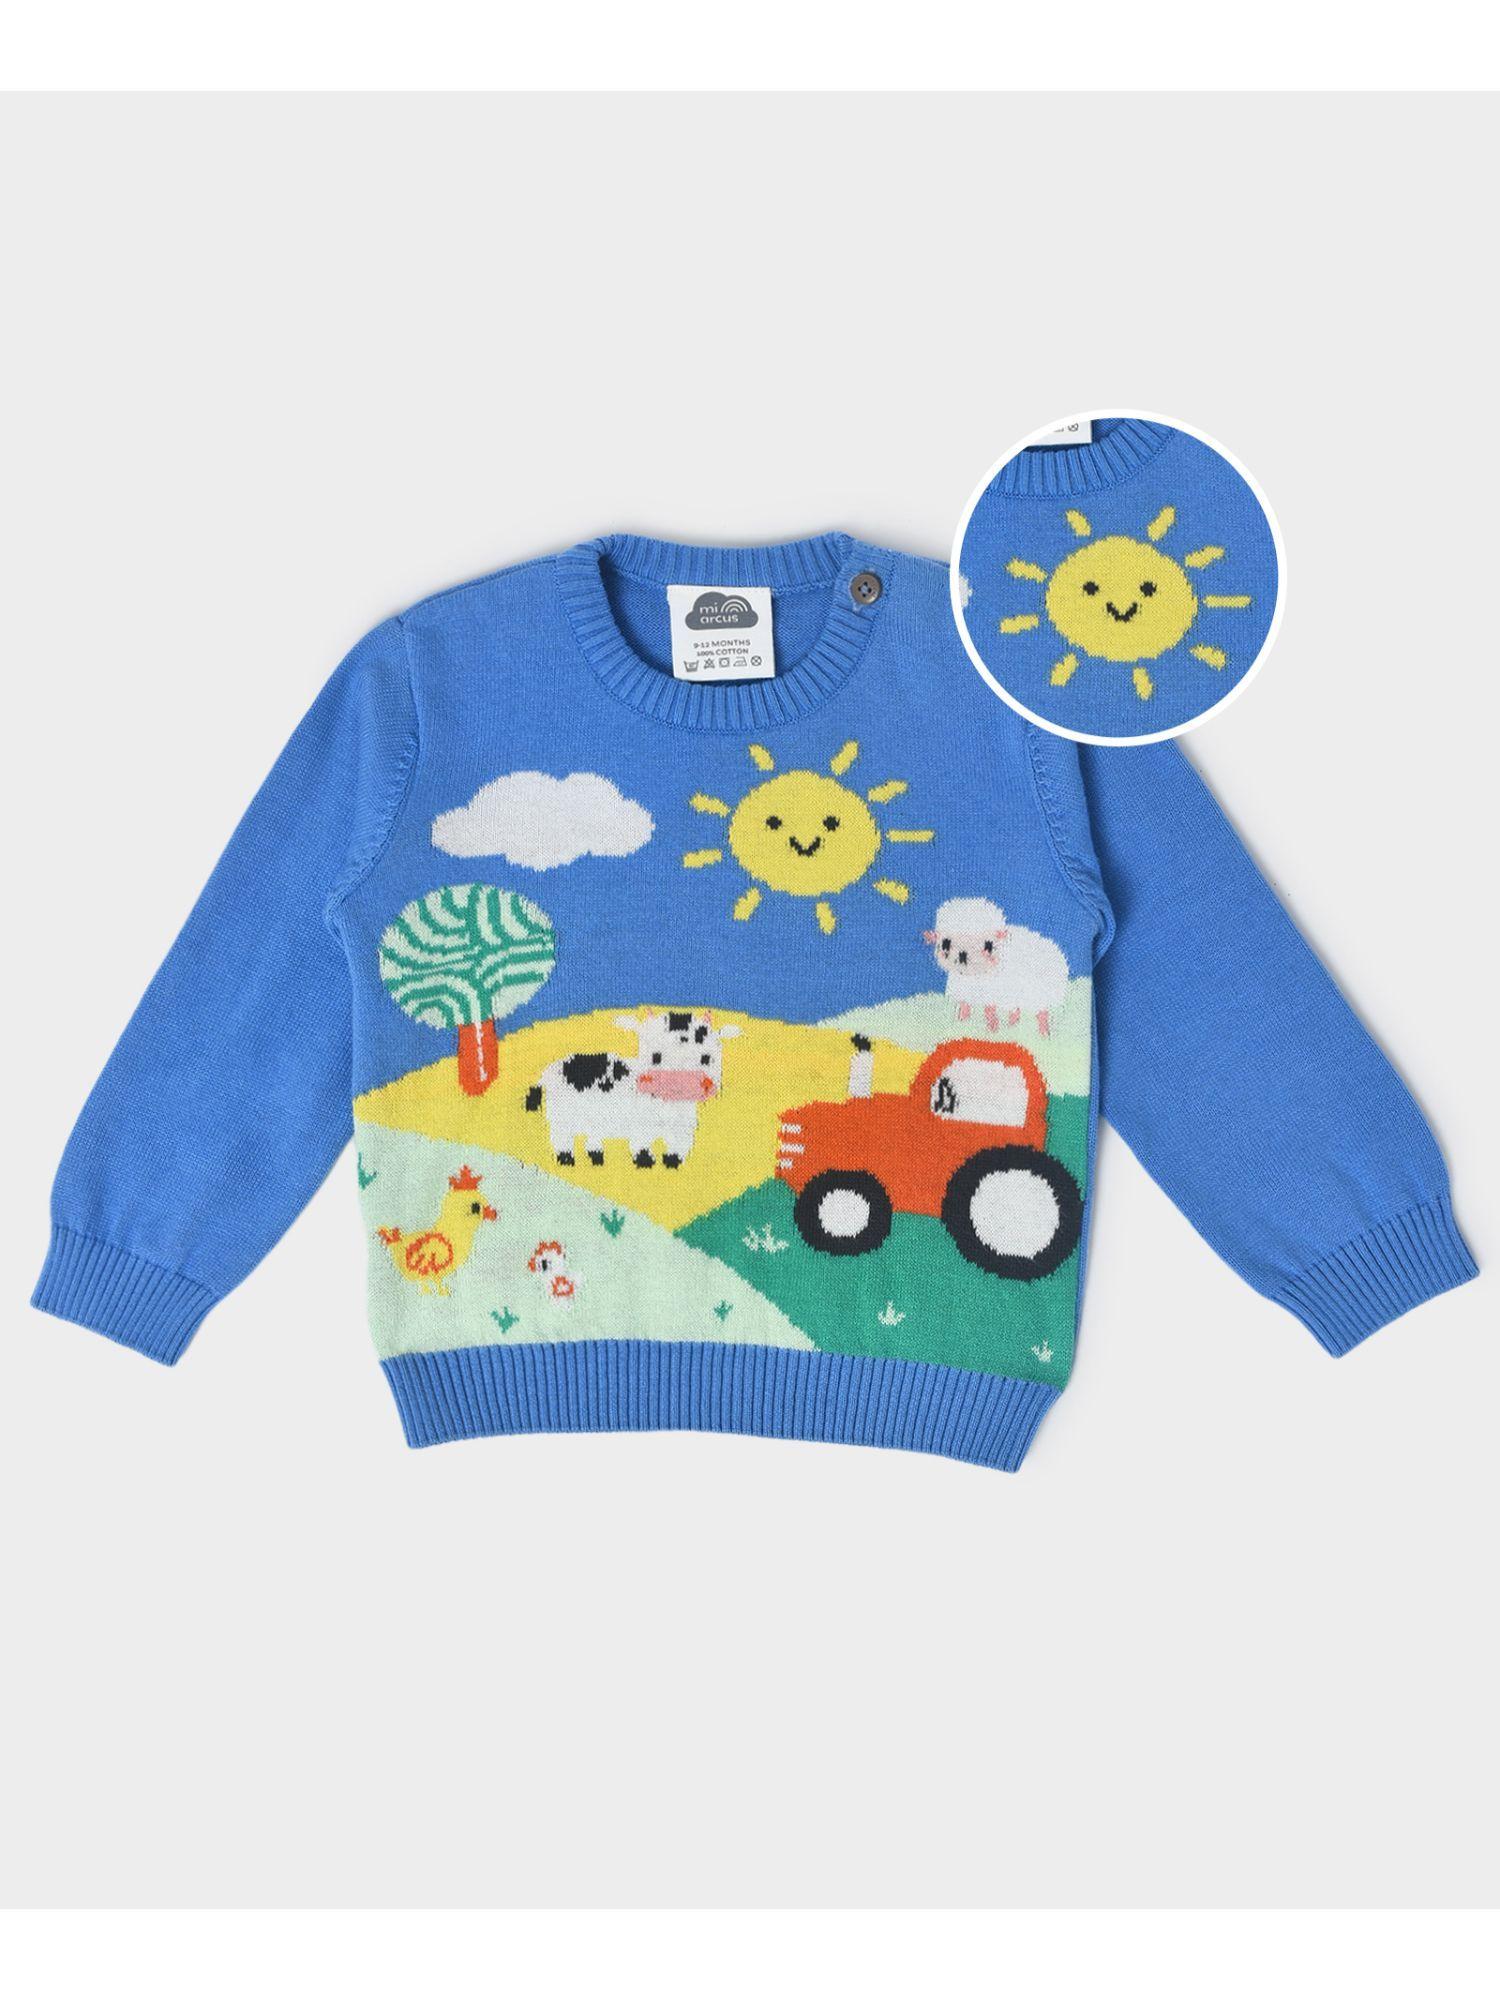 kids knitted blue sweater